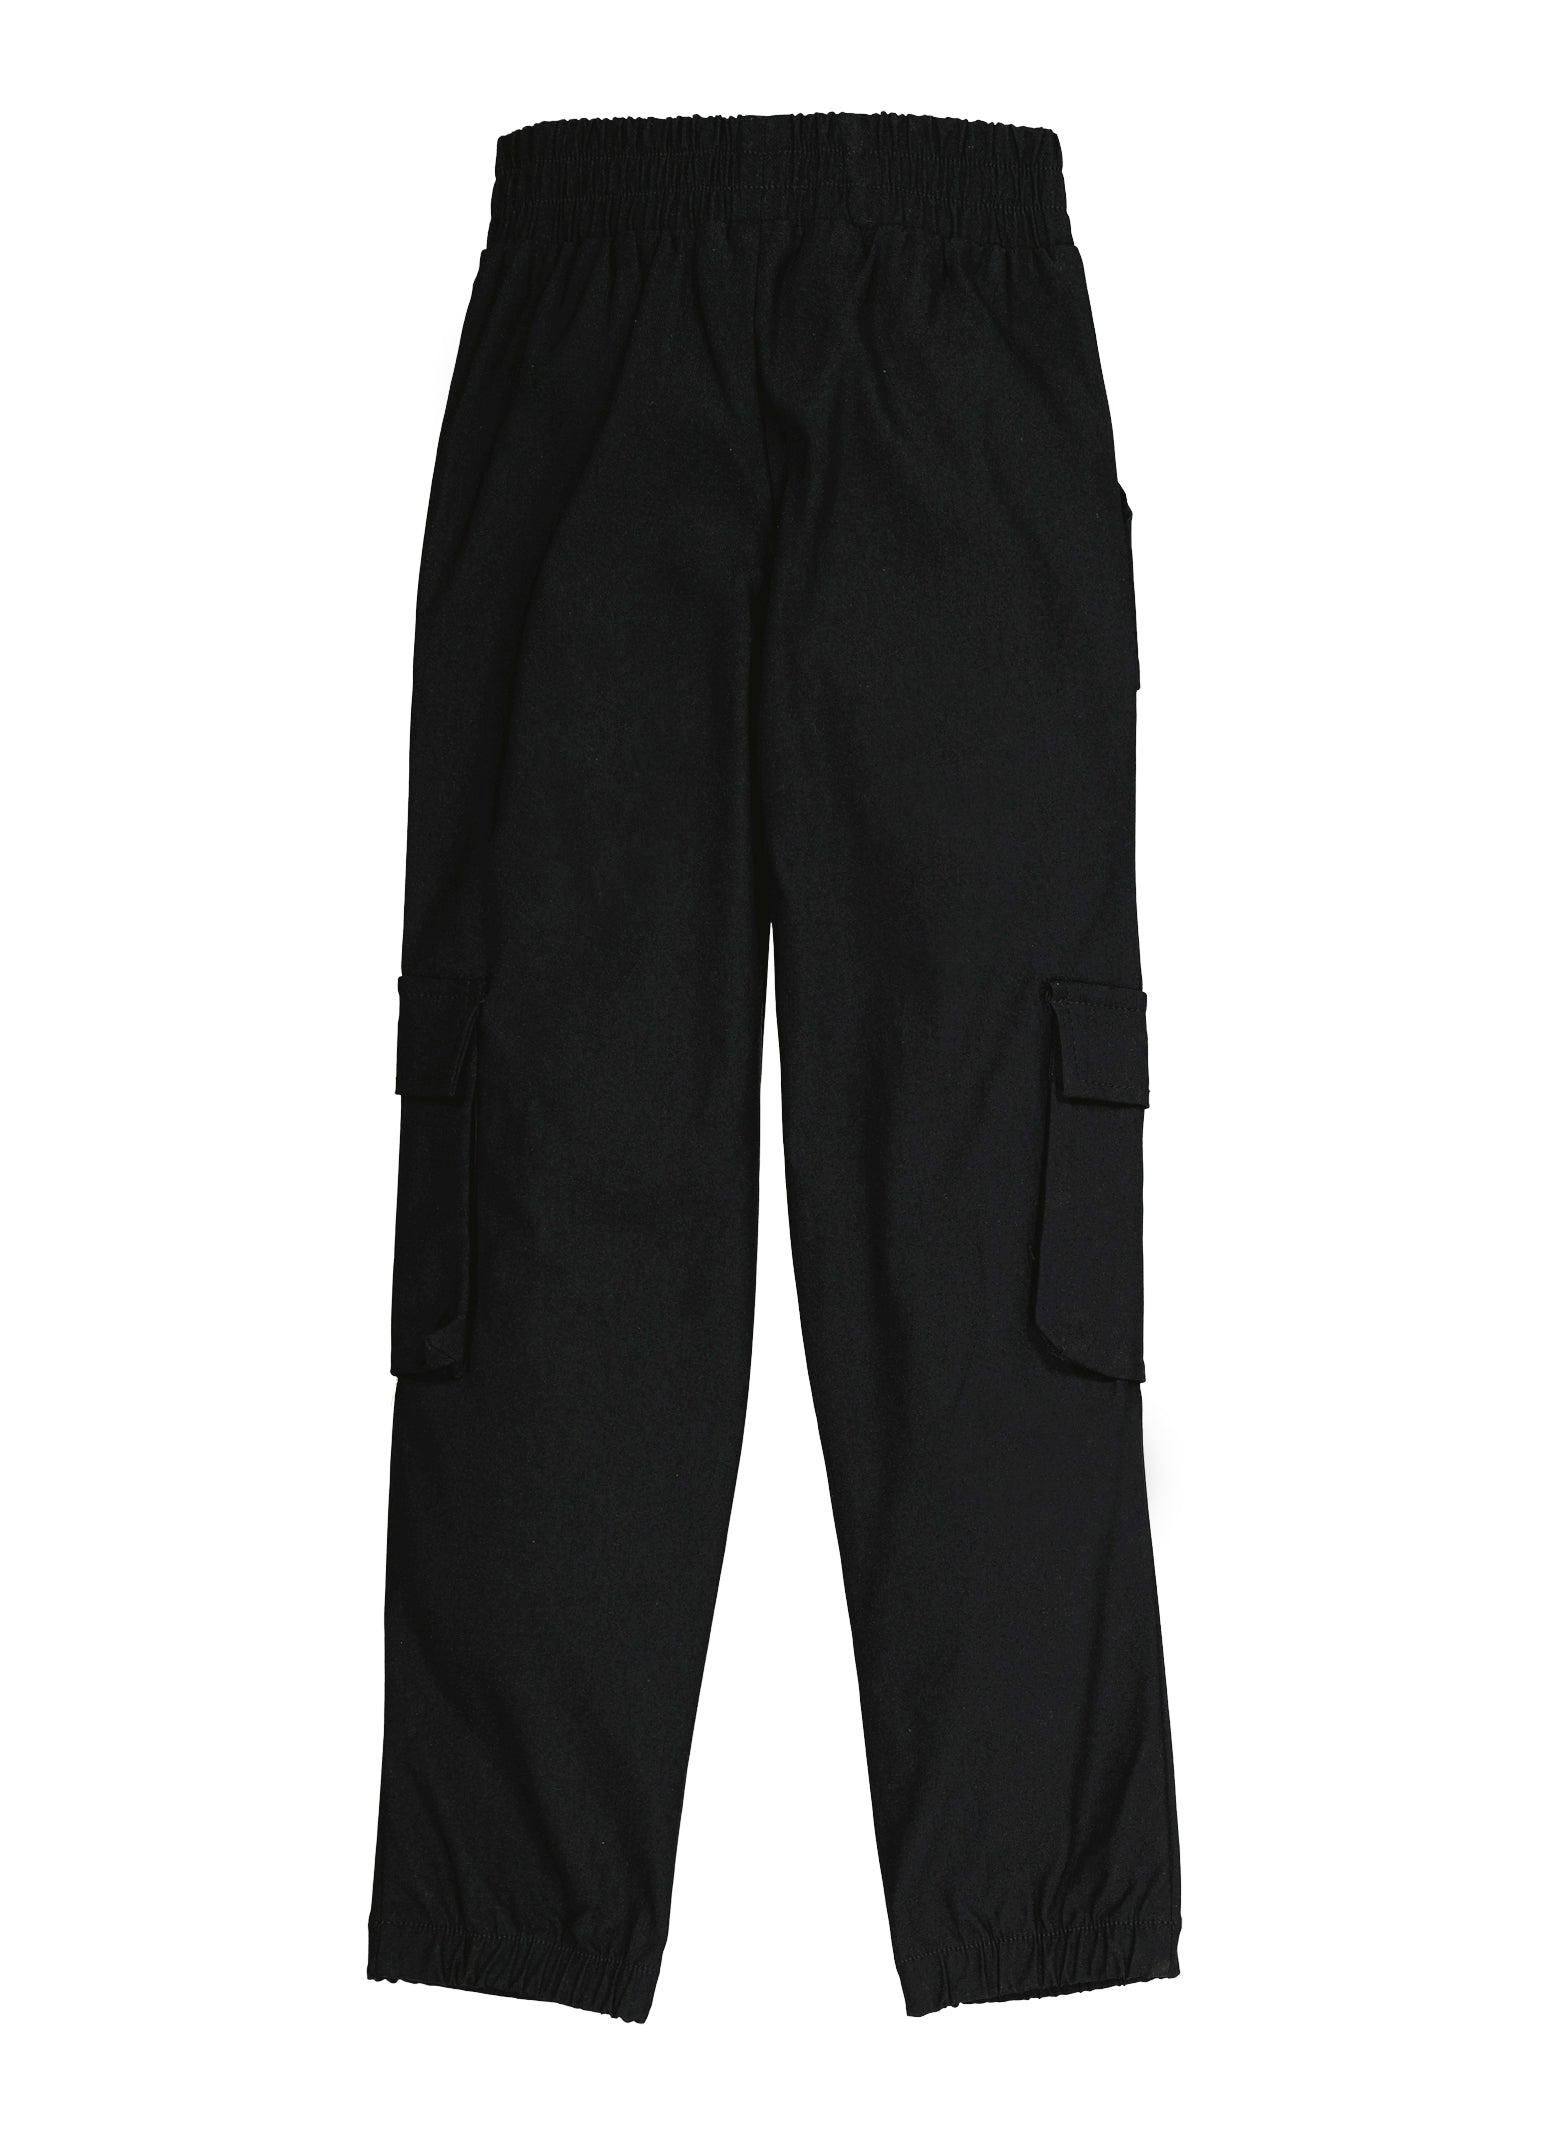 Buy Red Tape Black Solid Nylon Spandax Men's Activewear Jogger